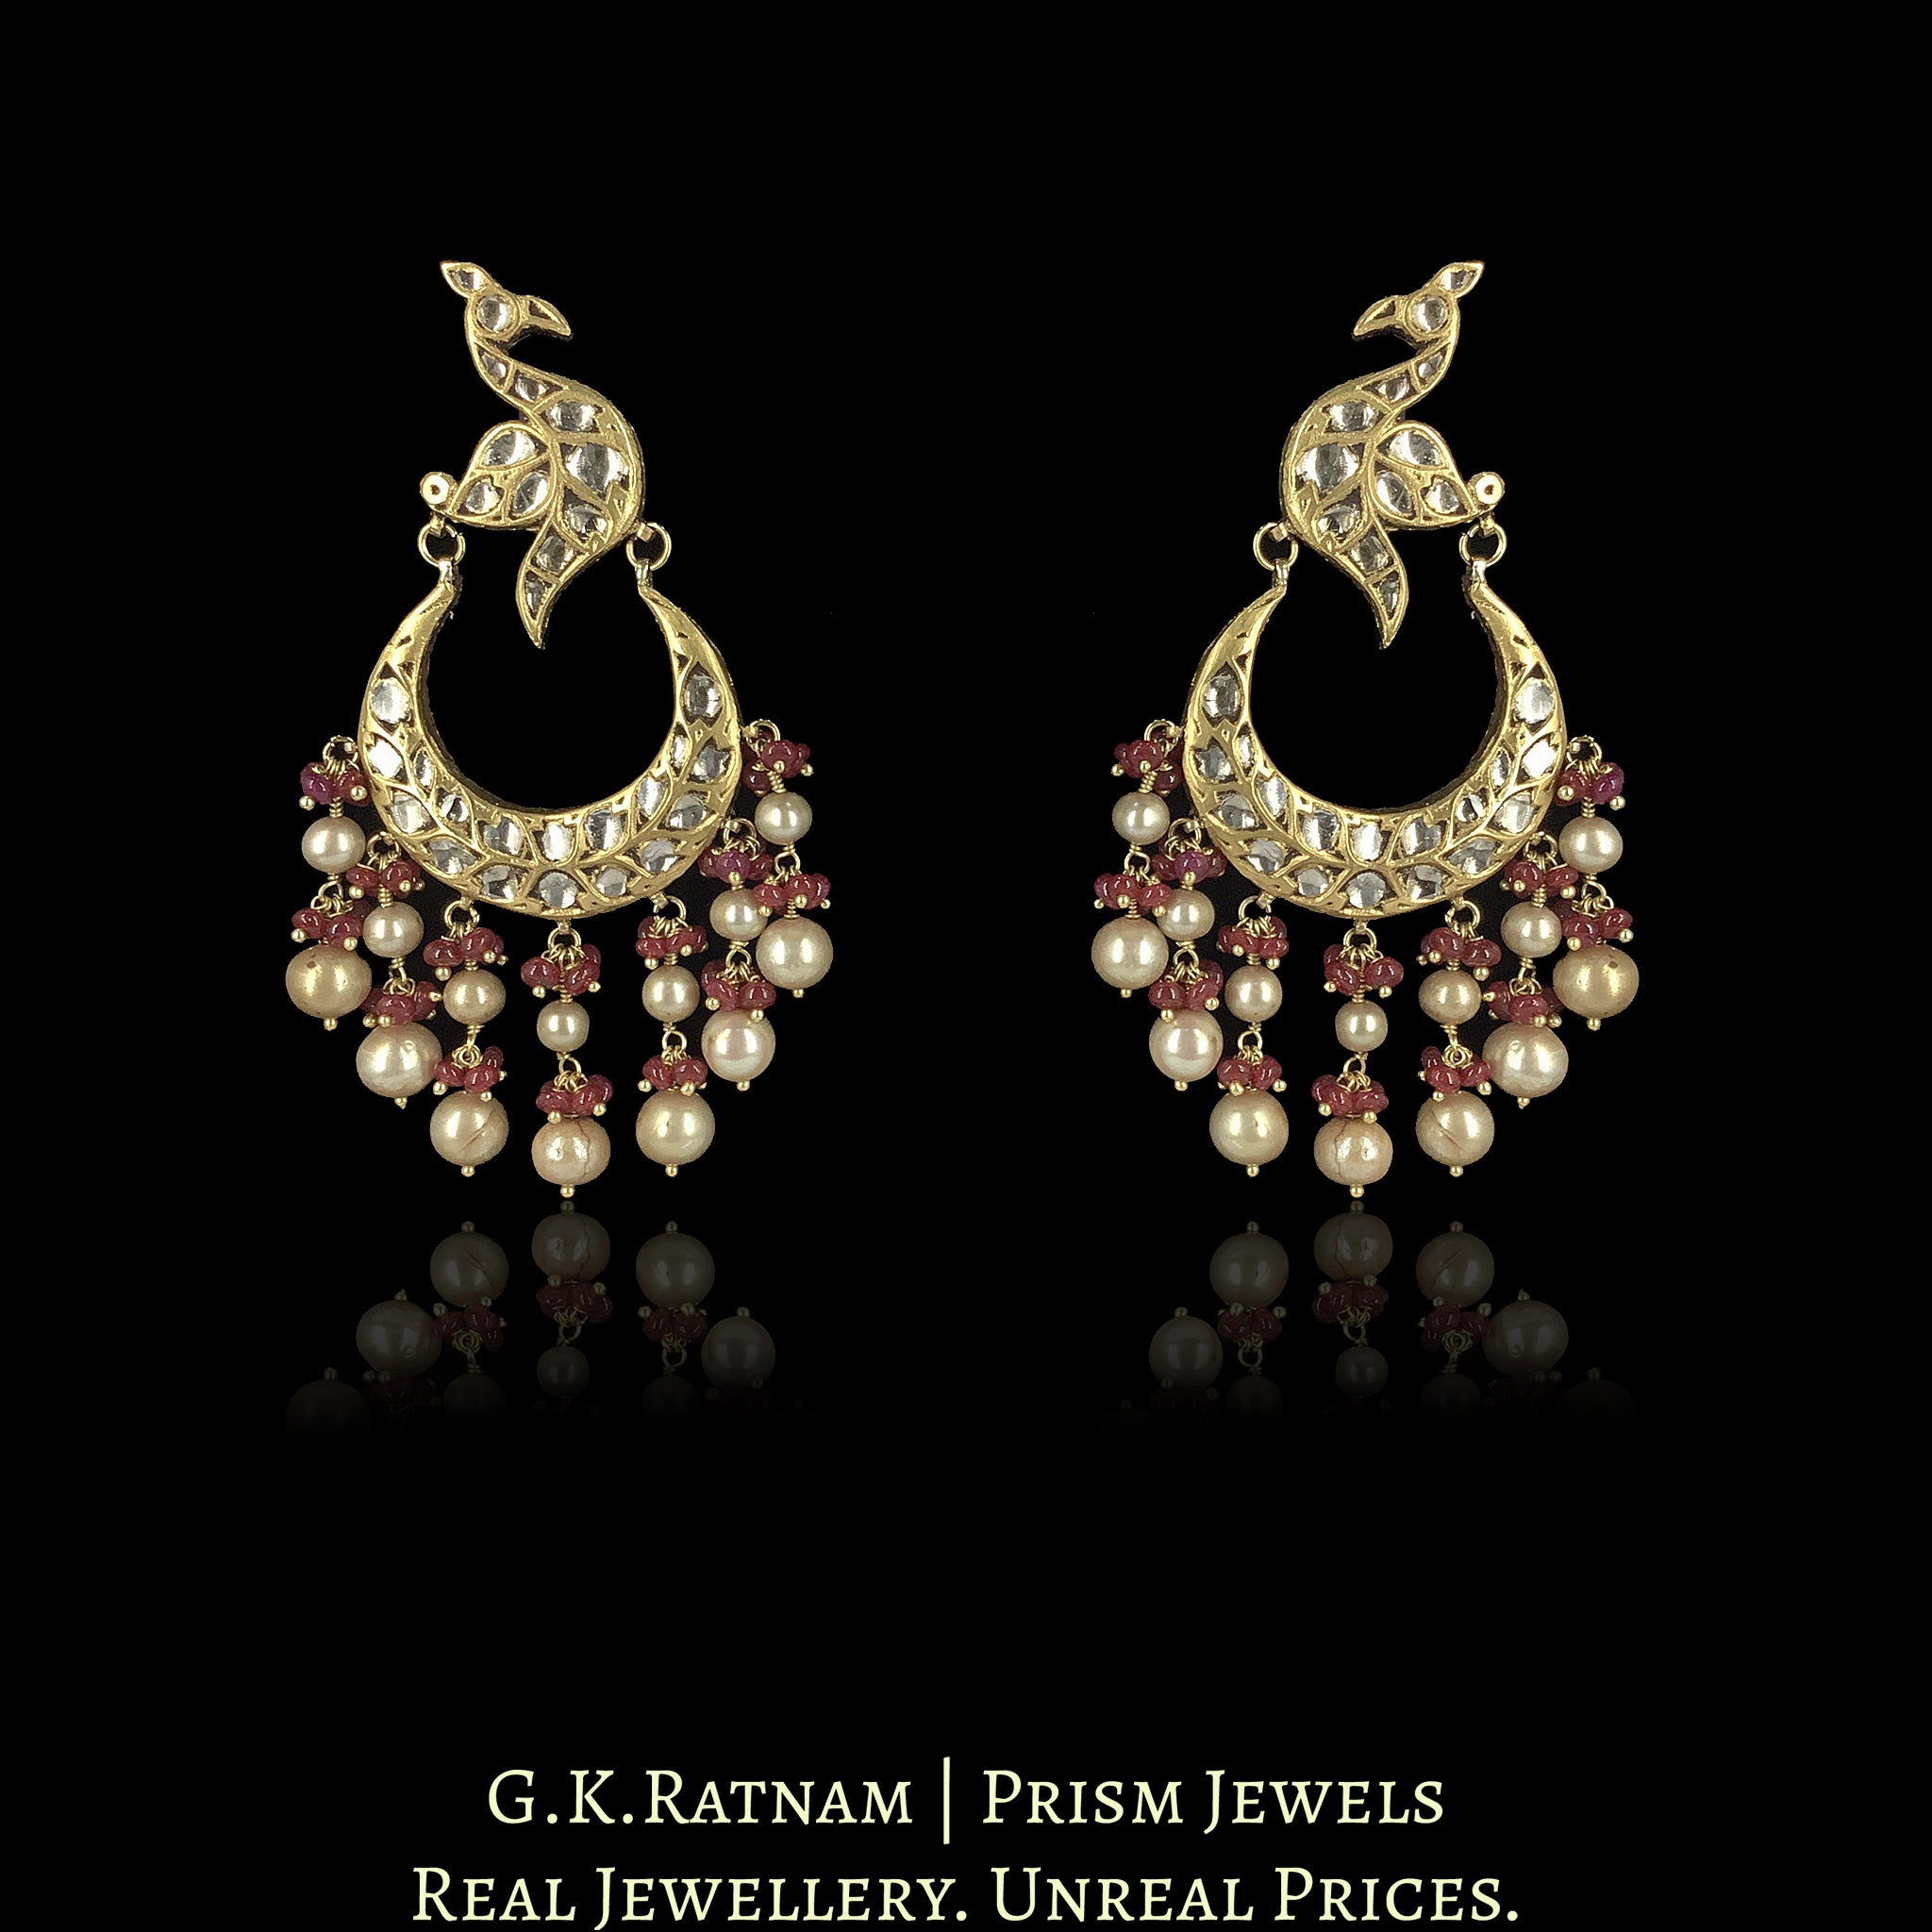 23k Gold and Diamond Polki Chand Bali Earring Pair with Peacock Motifs